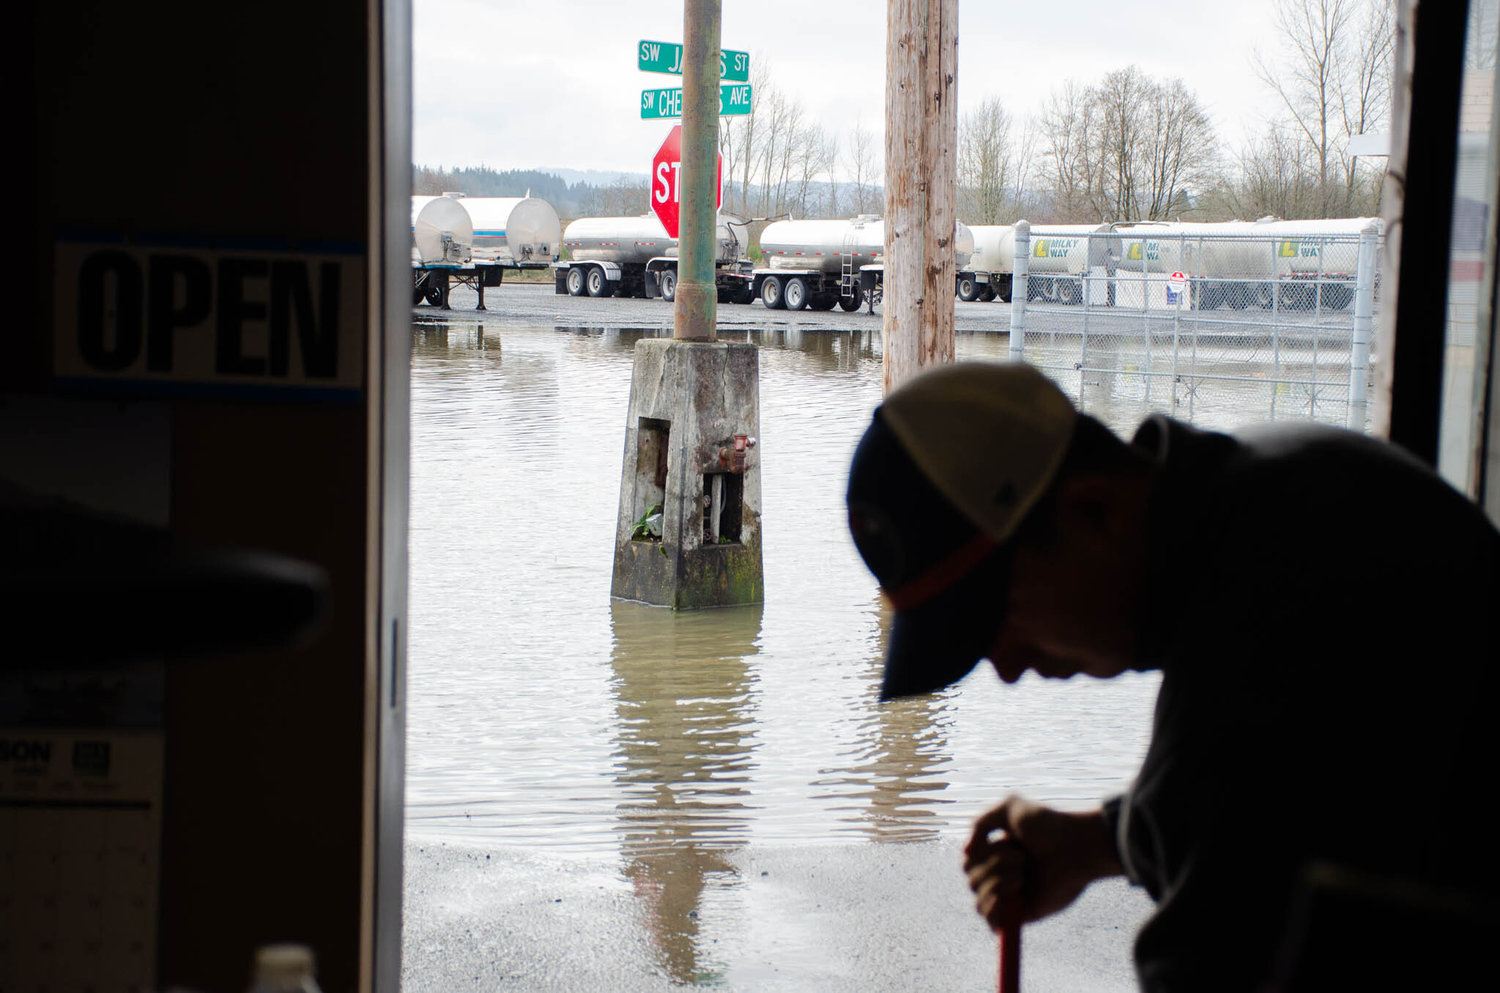 J.P. Padilla, a worker with Mills Northwest Heating and Cooling, squeegees flood water out from the business Saturday morning as flood water recede in the background.